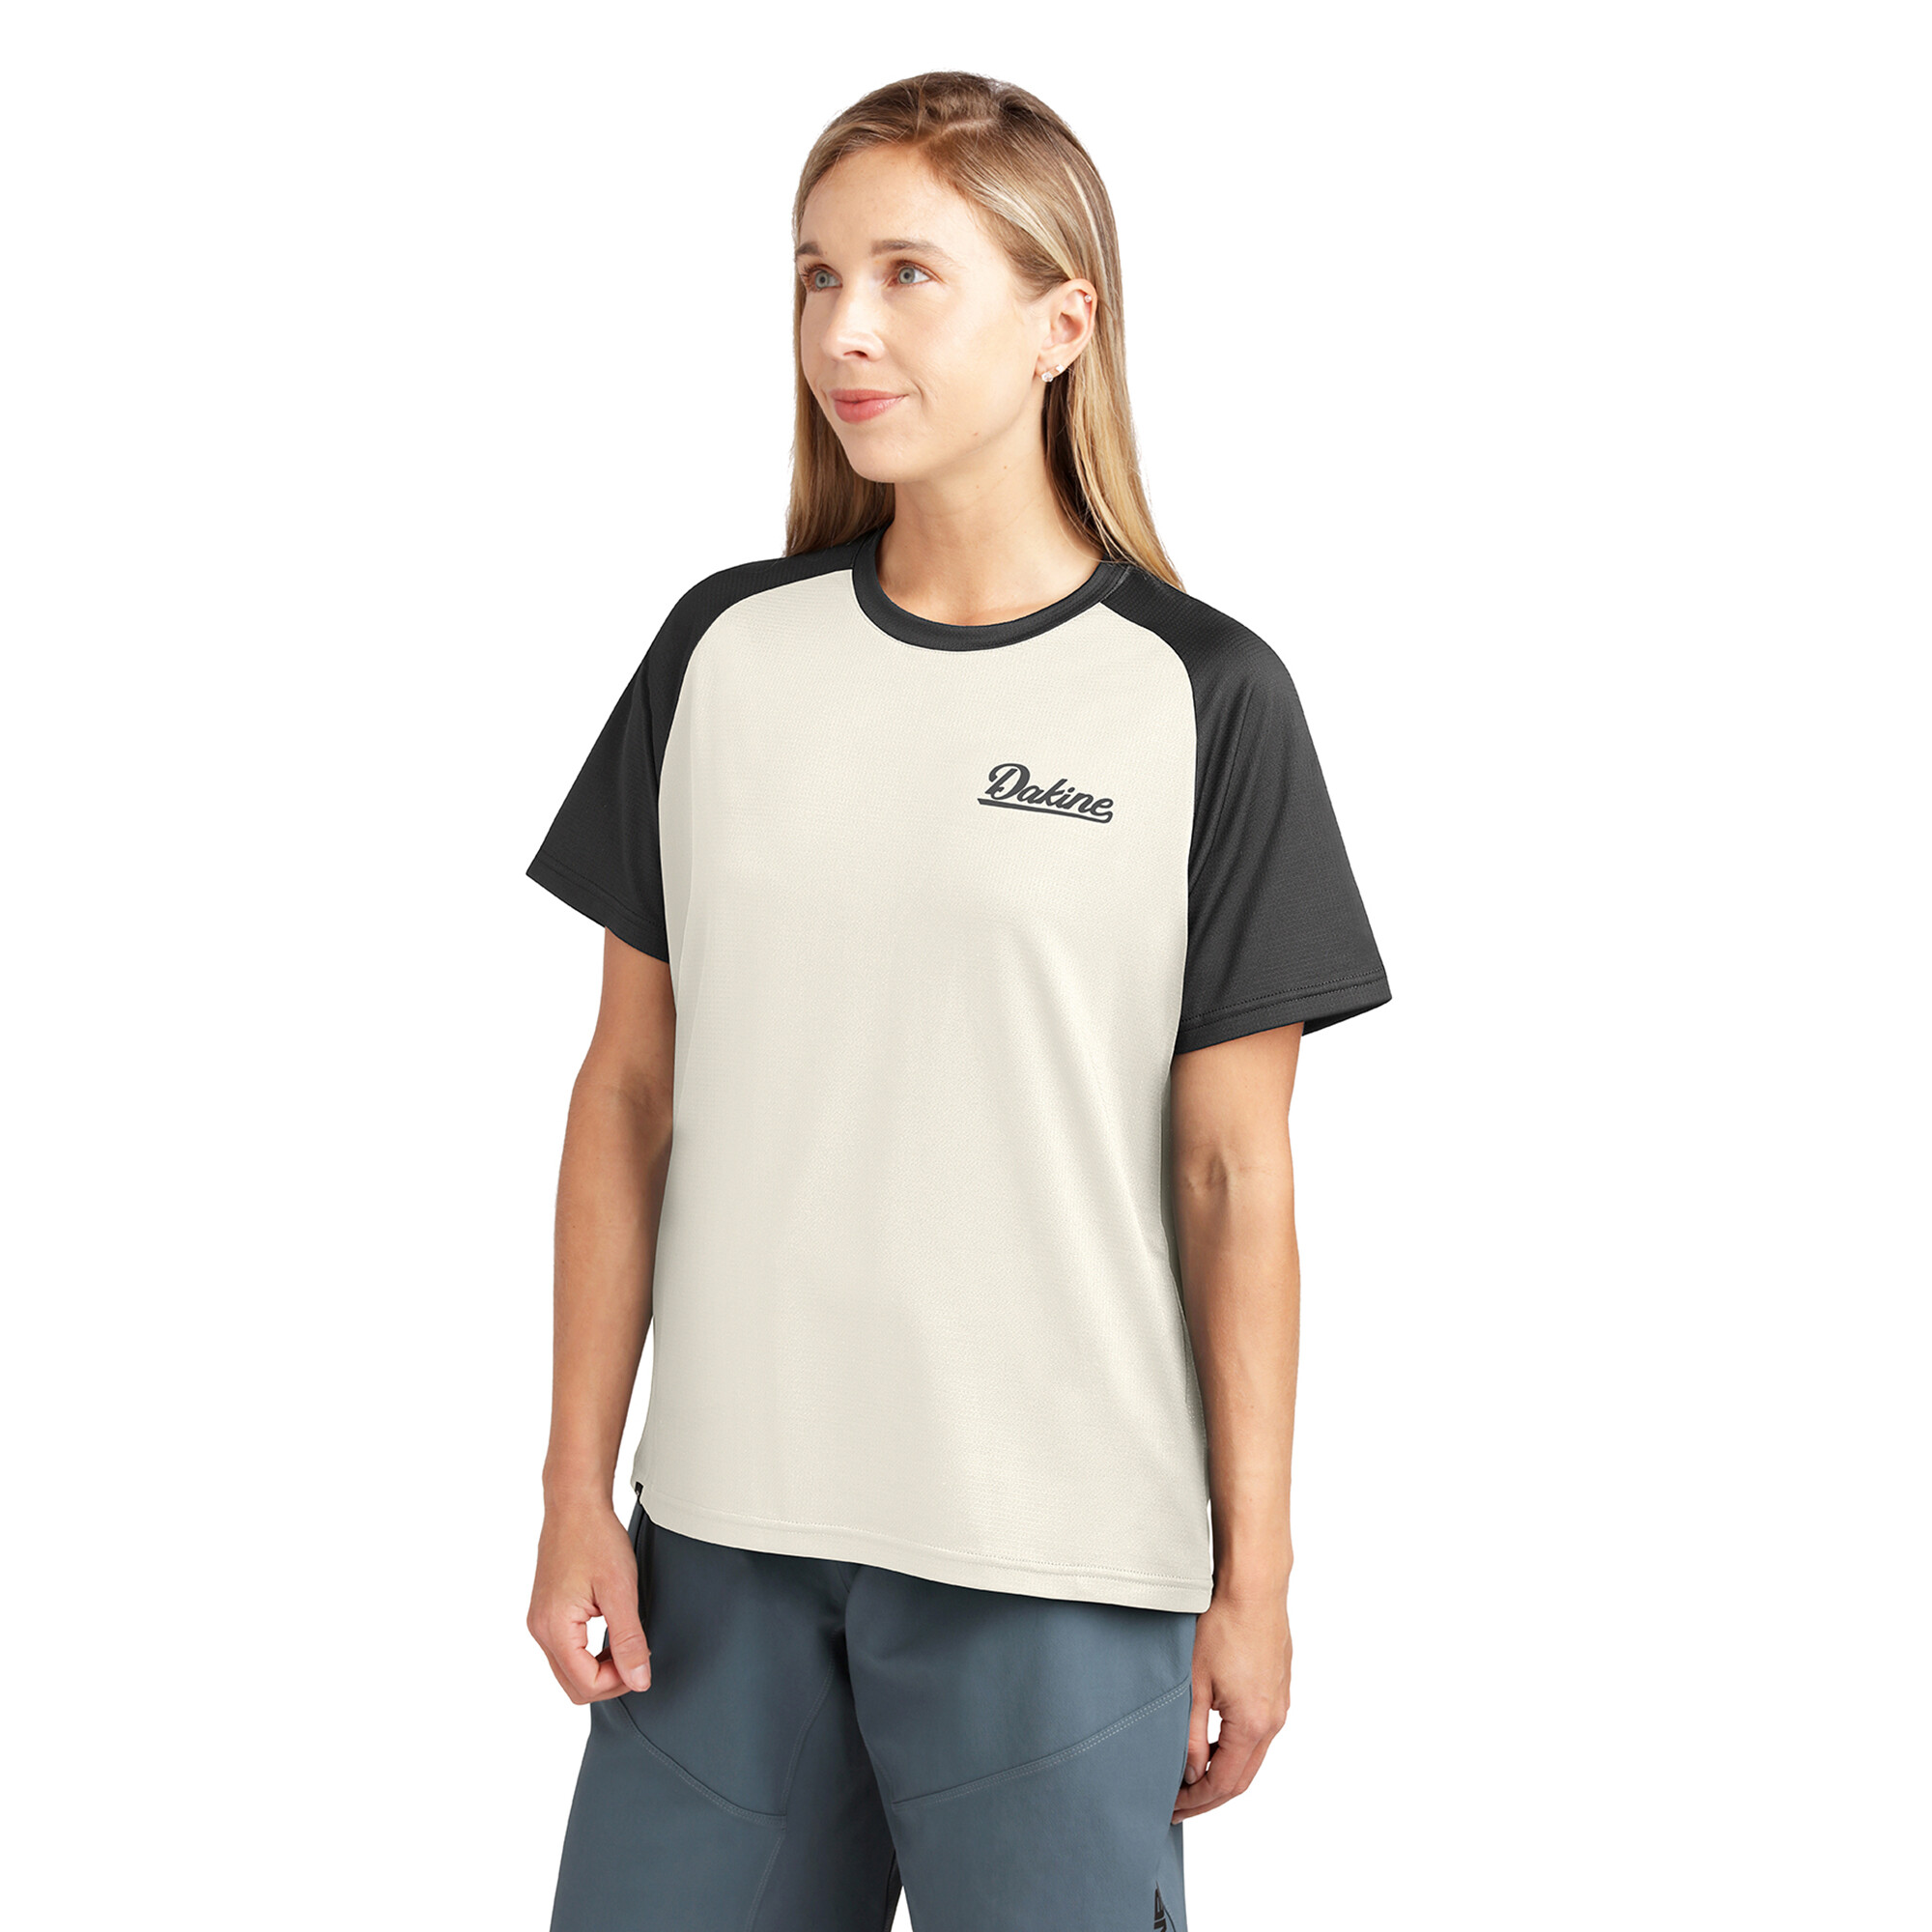 WOMEN'S SYNCLINE S/S JERSEY